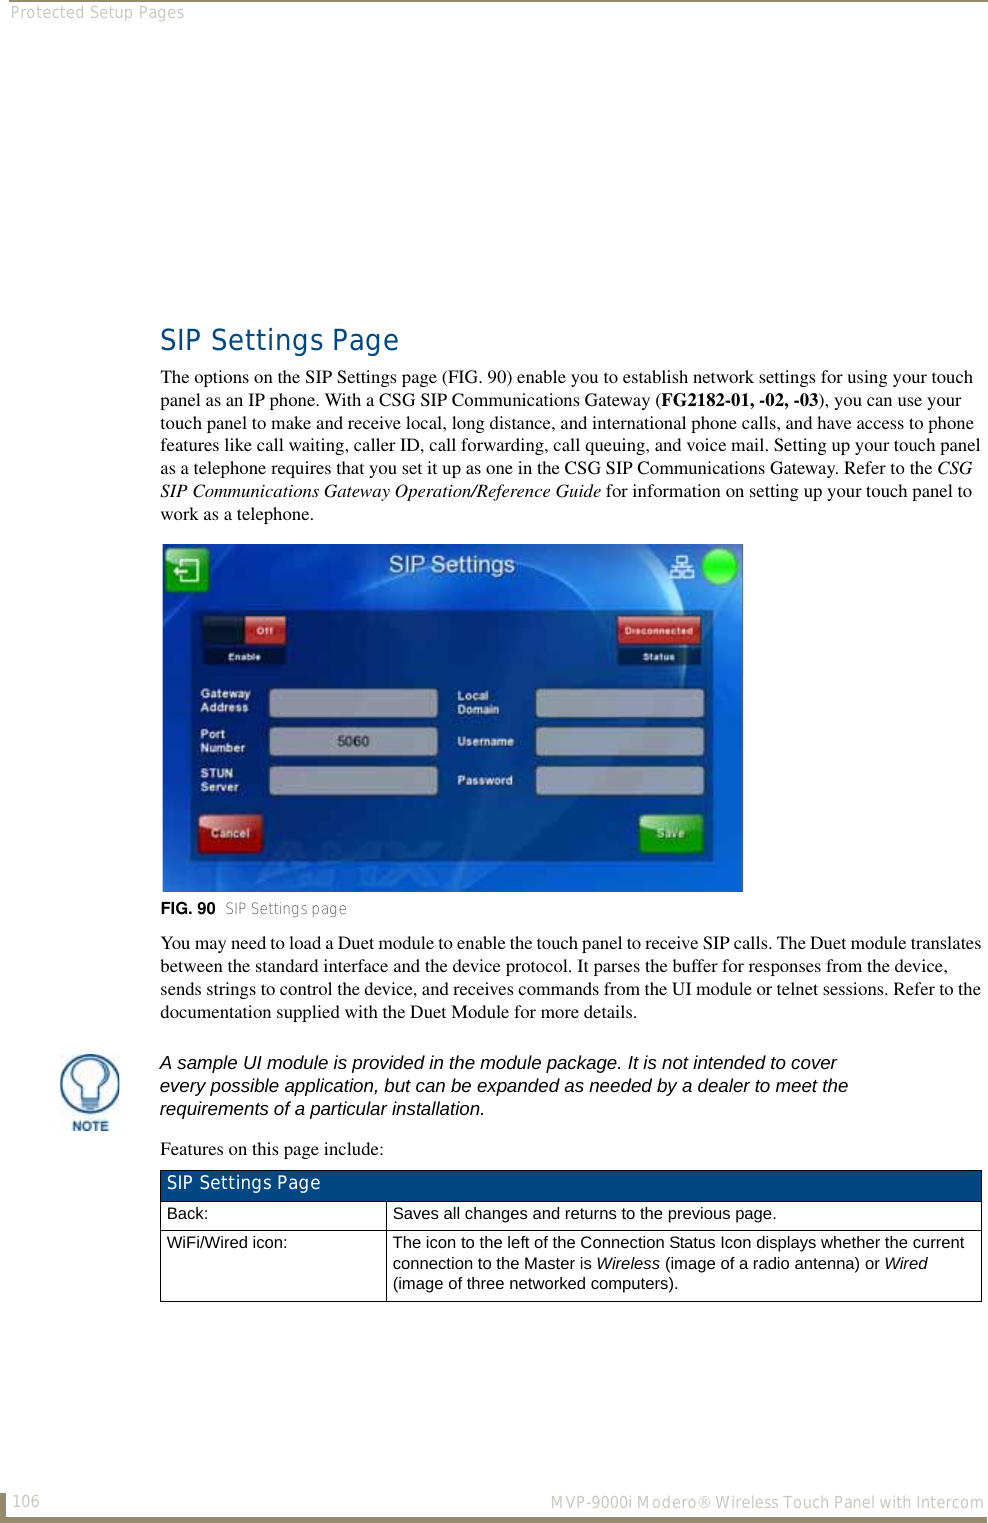 Protected Setup Pages106  MVP-9000i Modero® Wireless Touch Panel with IntercomSIP Settings PageThe options on the SIP Settings page (FIG. 90) enable you to establish network settings for using your touch panel as an IP phone. With a CSG SIP Communications Gateway (FG2182-01, -02, -03), you can use your touch panel to make and receive local, long distance, and international phone calls, and have access to phone features like call waiting, caller ID, call forwarding, call queuing, and voice mail. Setting up your touch panel as a telephone requires that you set it up as one in the CSG SIP Communications Gateway. Refer to the CSG SIP Communications Gateway Operation/Reference Guide for information on setting up your touch panel to work as a telephone.You may need to load a Duet module to enable the touch panel to receive SIP calls. The Duet module translates between the standard interface and the device protocol. It parses the buffer for responses from the device, sends strings to control the device, and receives commands from the UI module or telnet sessions. Refer to the documentation supplied with the Duet Module for more details.Features on this page include: FIG. 90  SIP Settings pageA sample UI module is provided in the module package. It is not intended to cover every possible application, but can be expanded as needed by a dealer to meet the requirements of a particular installation. SIP Settings Page Back: Saves all changes and returns to the previous page.WiFi/Wired icon: The icon to the left of the Connection Status Icon displays whether the current connection to the Master is Wireless (image of a radio antenna) or Wired (image of three networked computers).